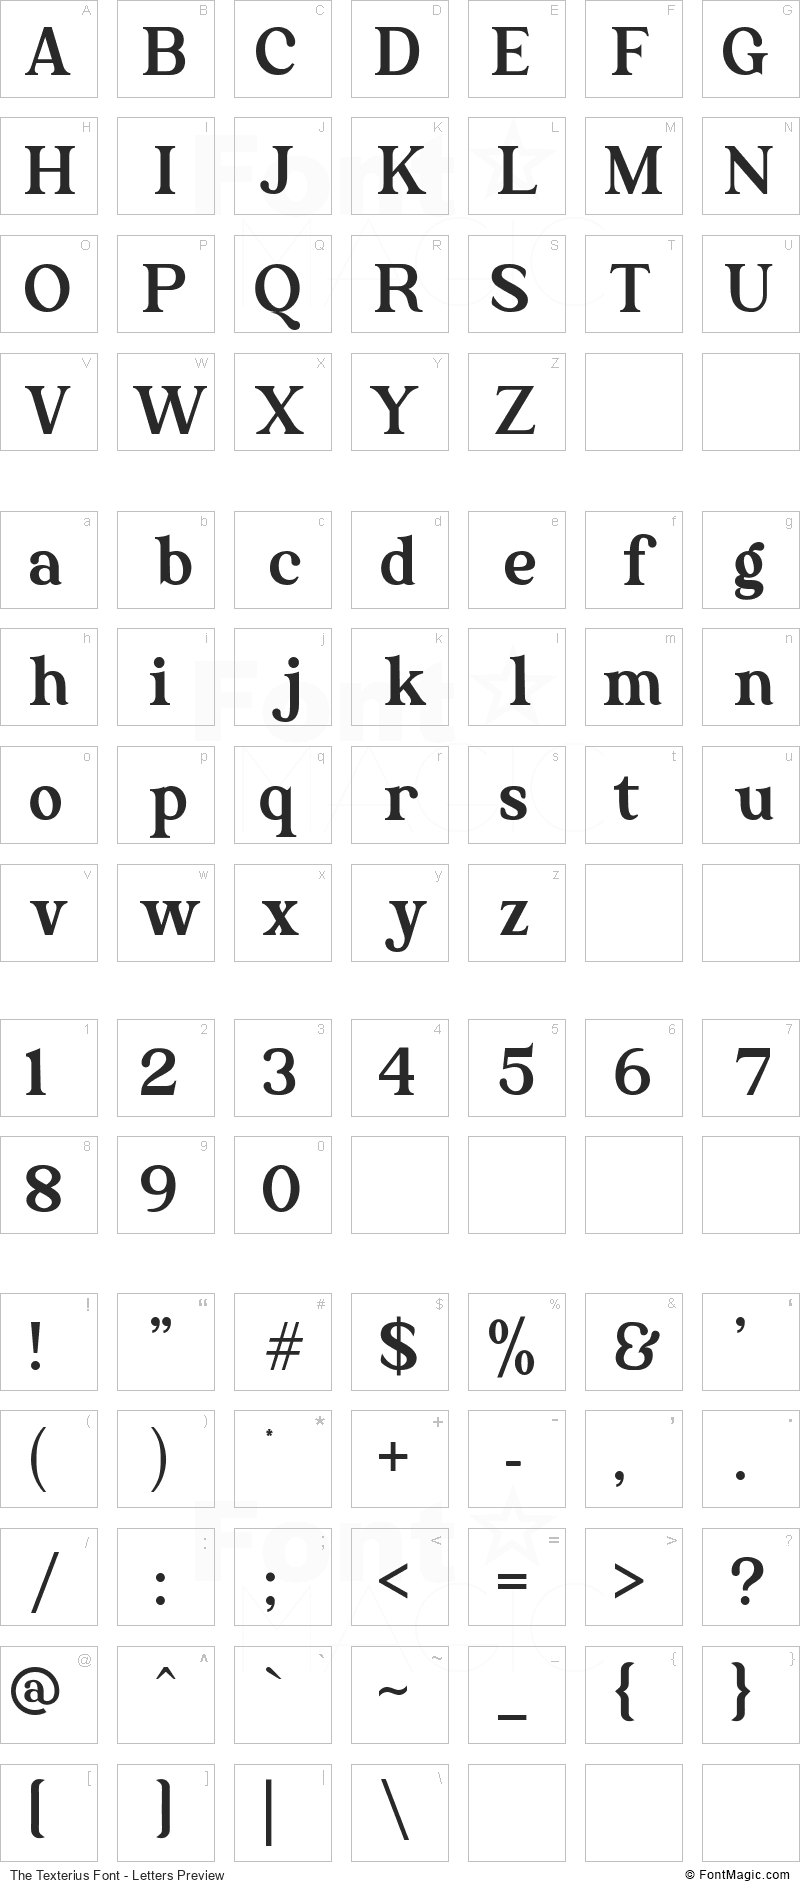 The Texterius Font - All Latters Preview Chart